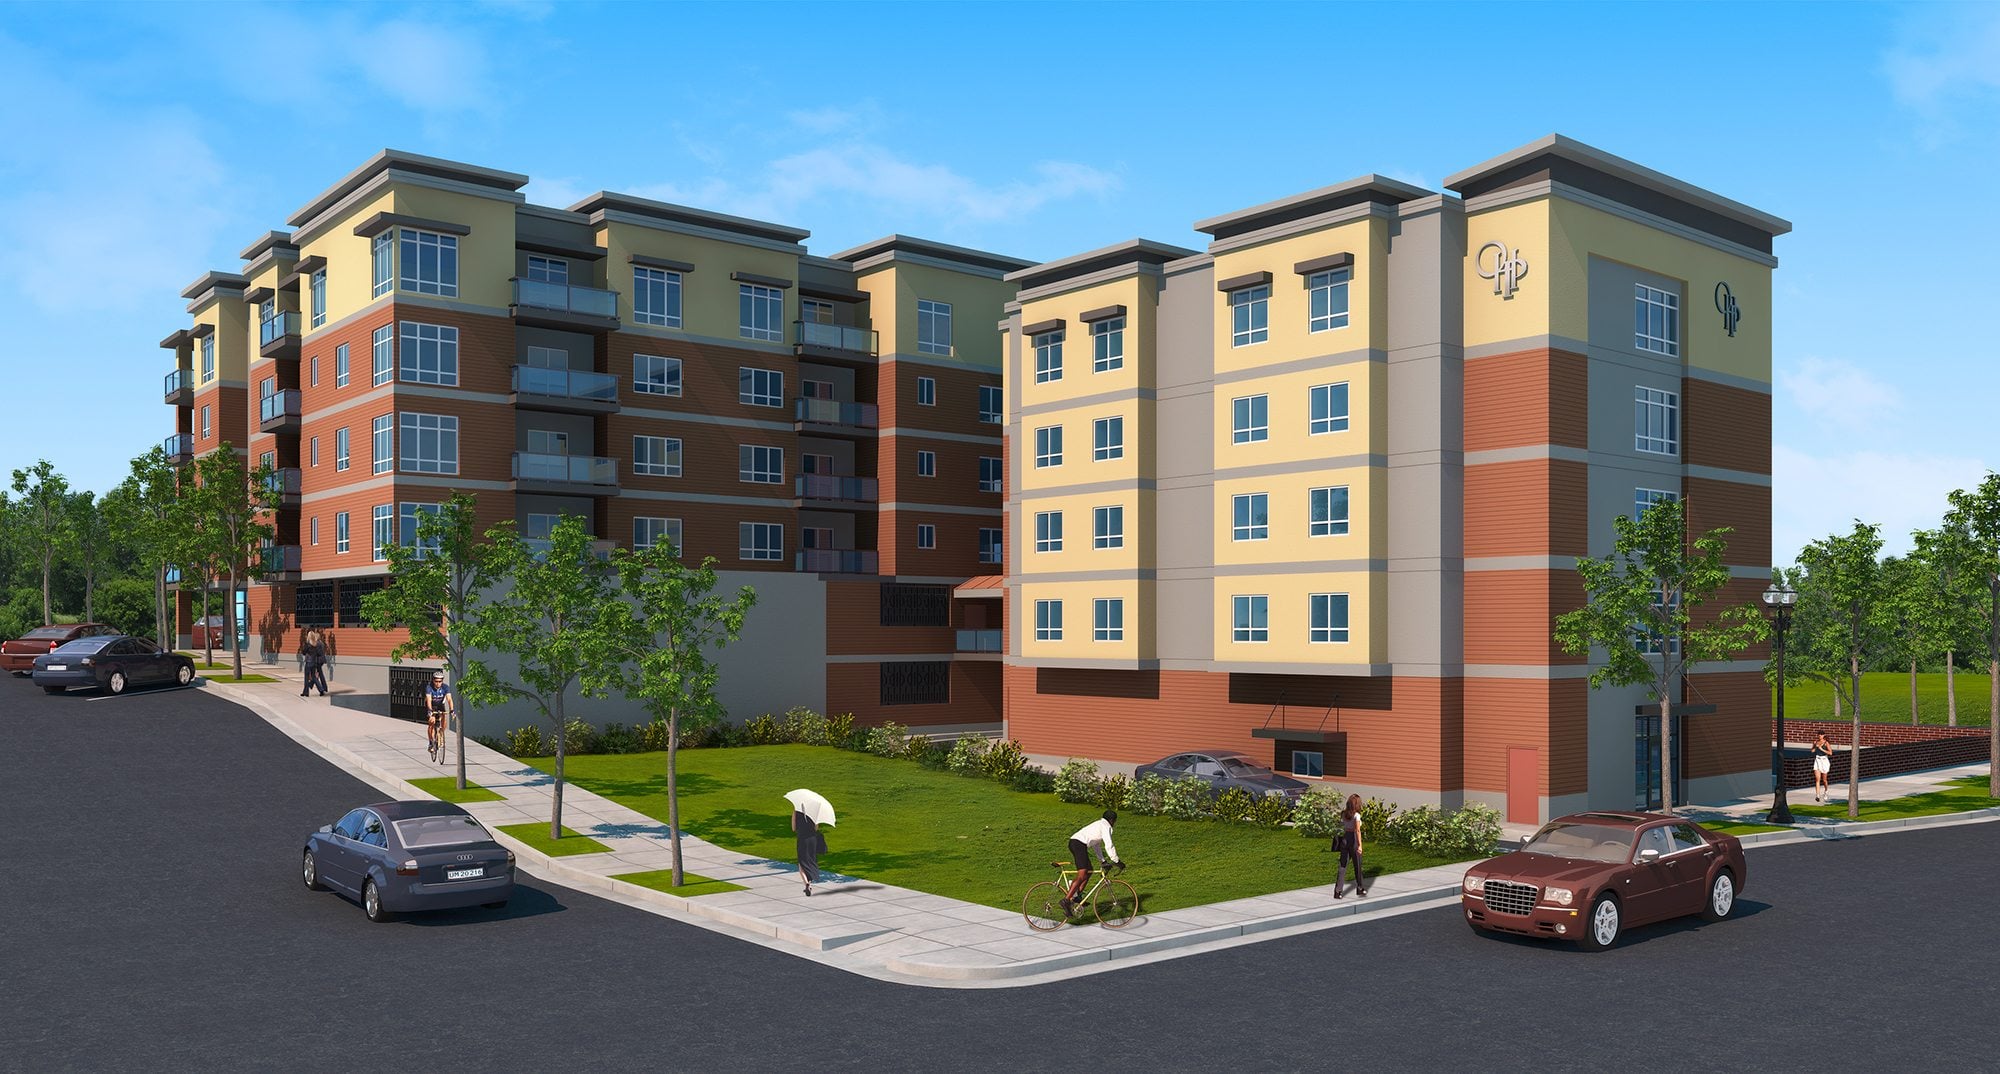 Our Heroes Place, a building planned by Prestige Development on Mill Plain Boulevard, will offer a housing option for Clark College&#039;s international students, said Elie Kassab, CEO of the development firm. Kassab said Prestige will make an effort to accept international students even if they don&#039;t have typical documentation required by landlords when the building opens next year.